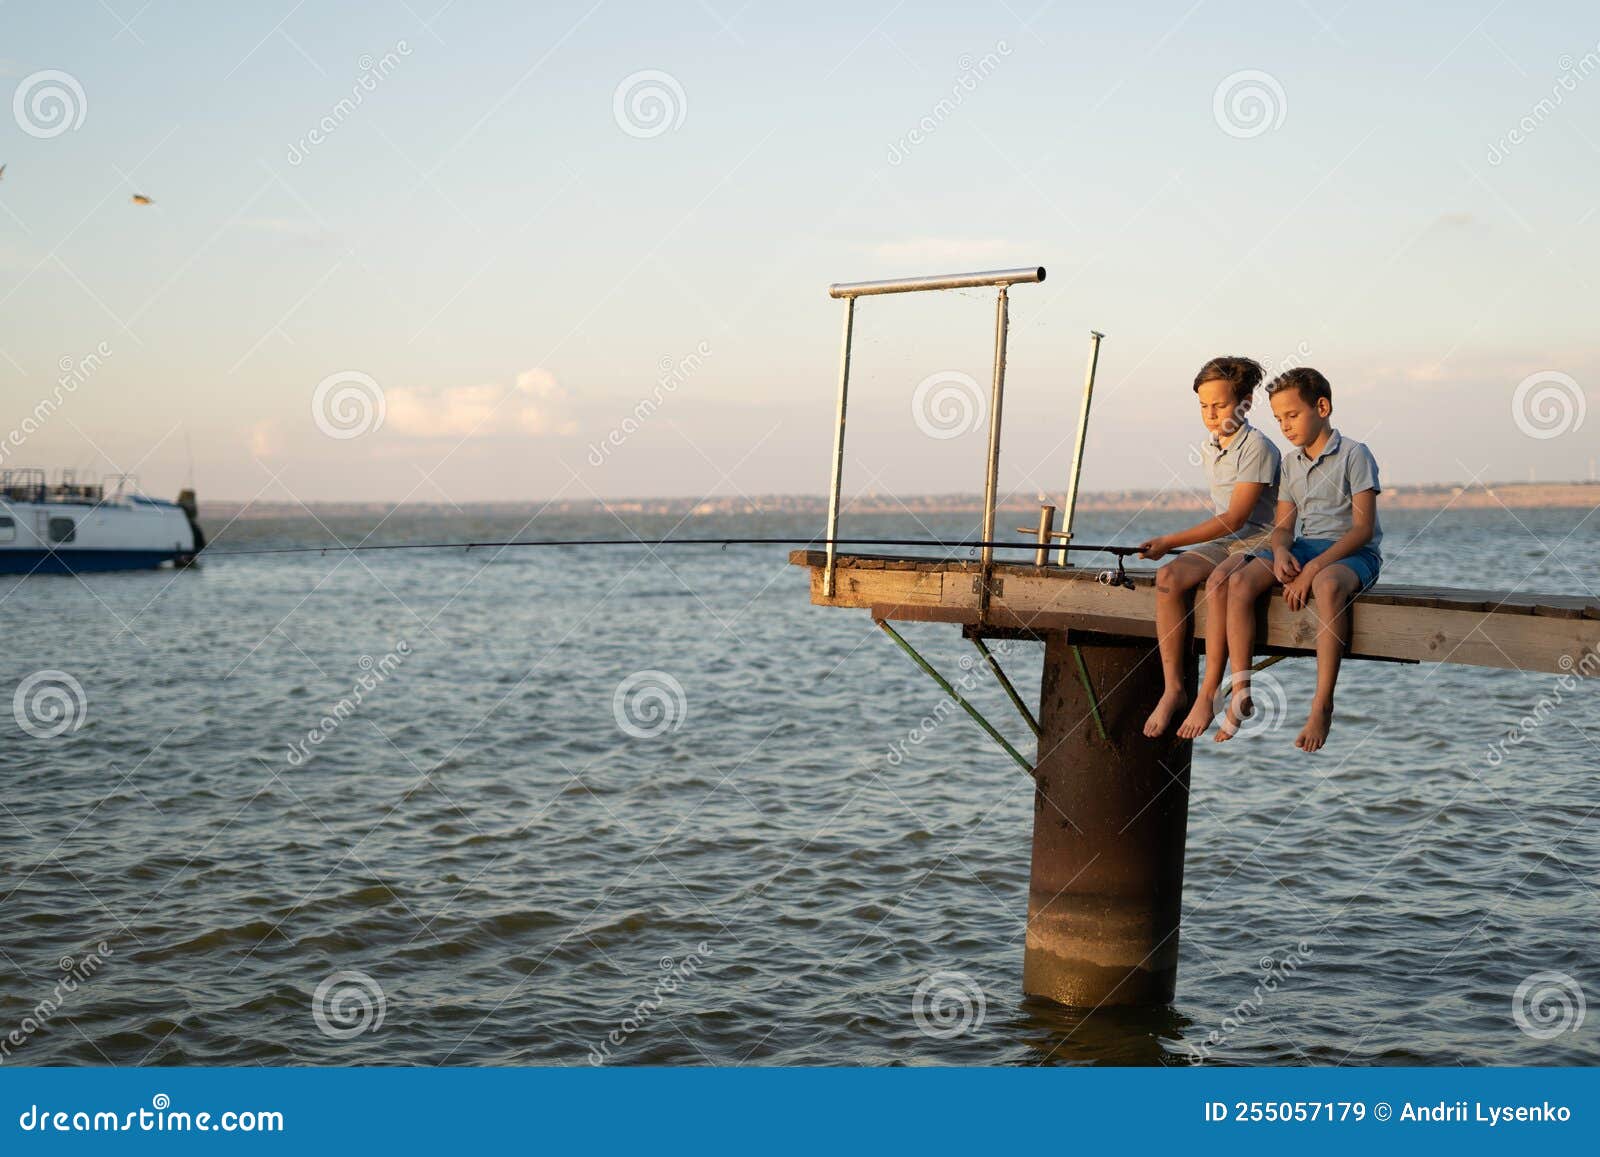 Two Boys Fishing with a Fishing Rod on a Lake at Sunset. Children